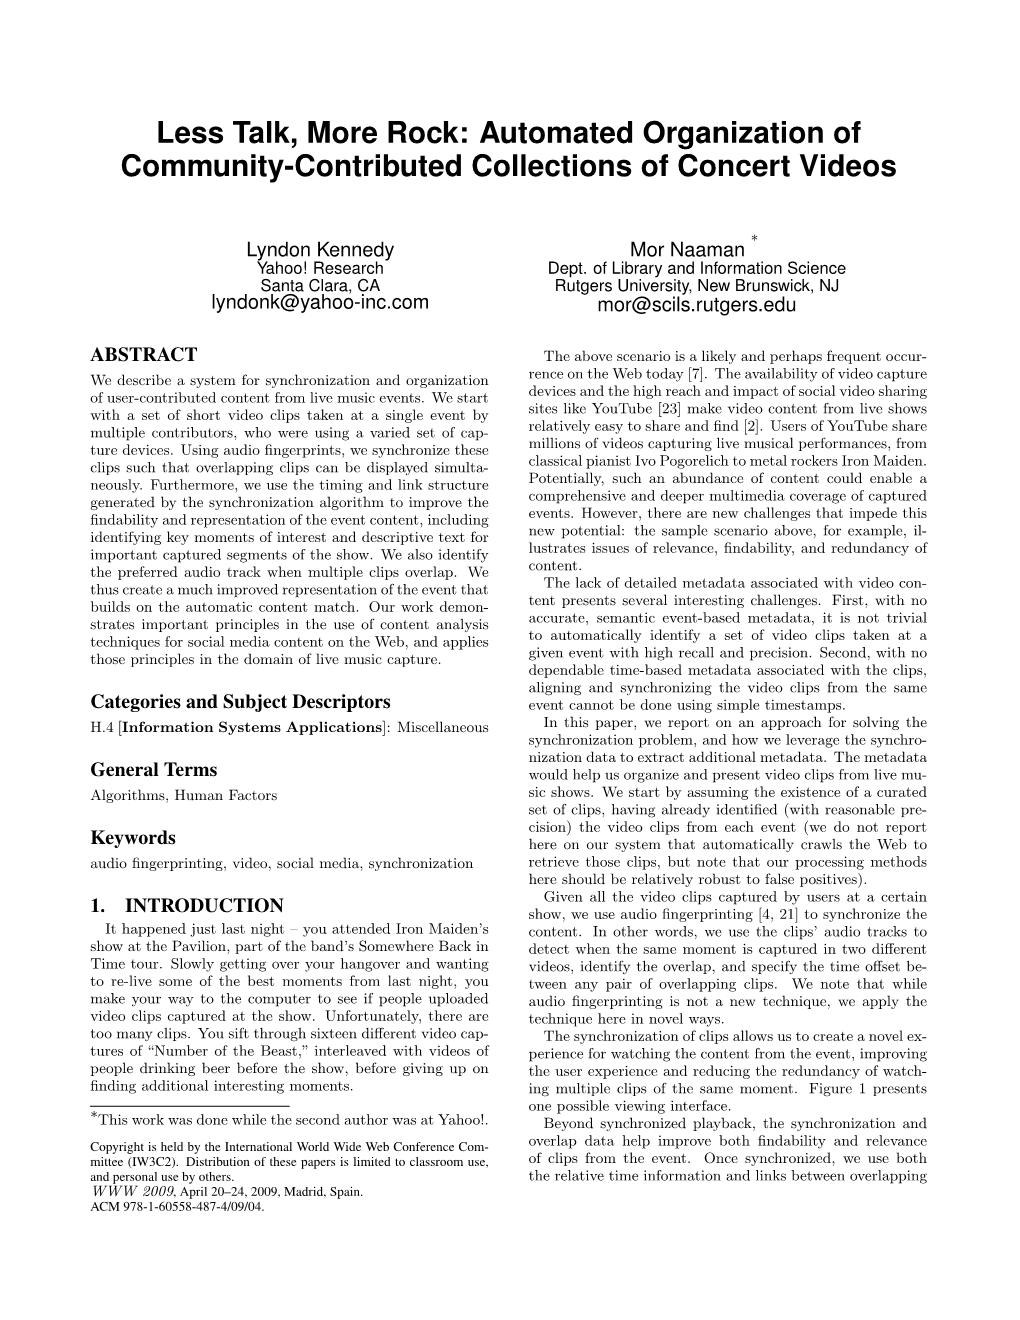 Less Talk, More Rock: Automated Organization of Community-Contributed Collections of Concert Videos